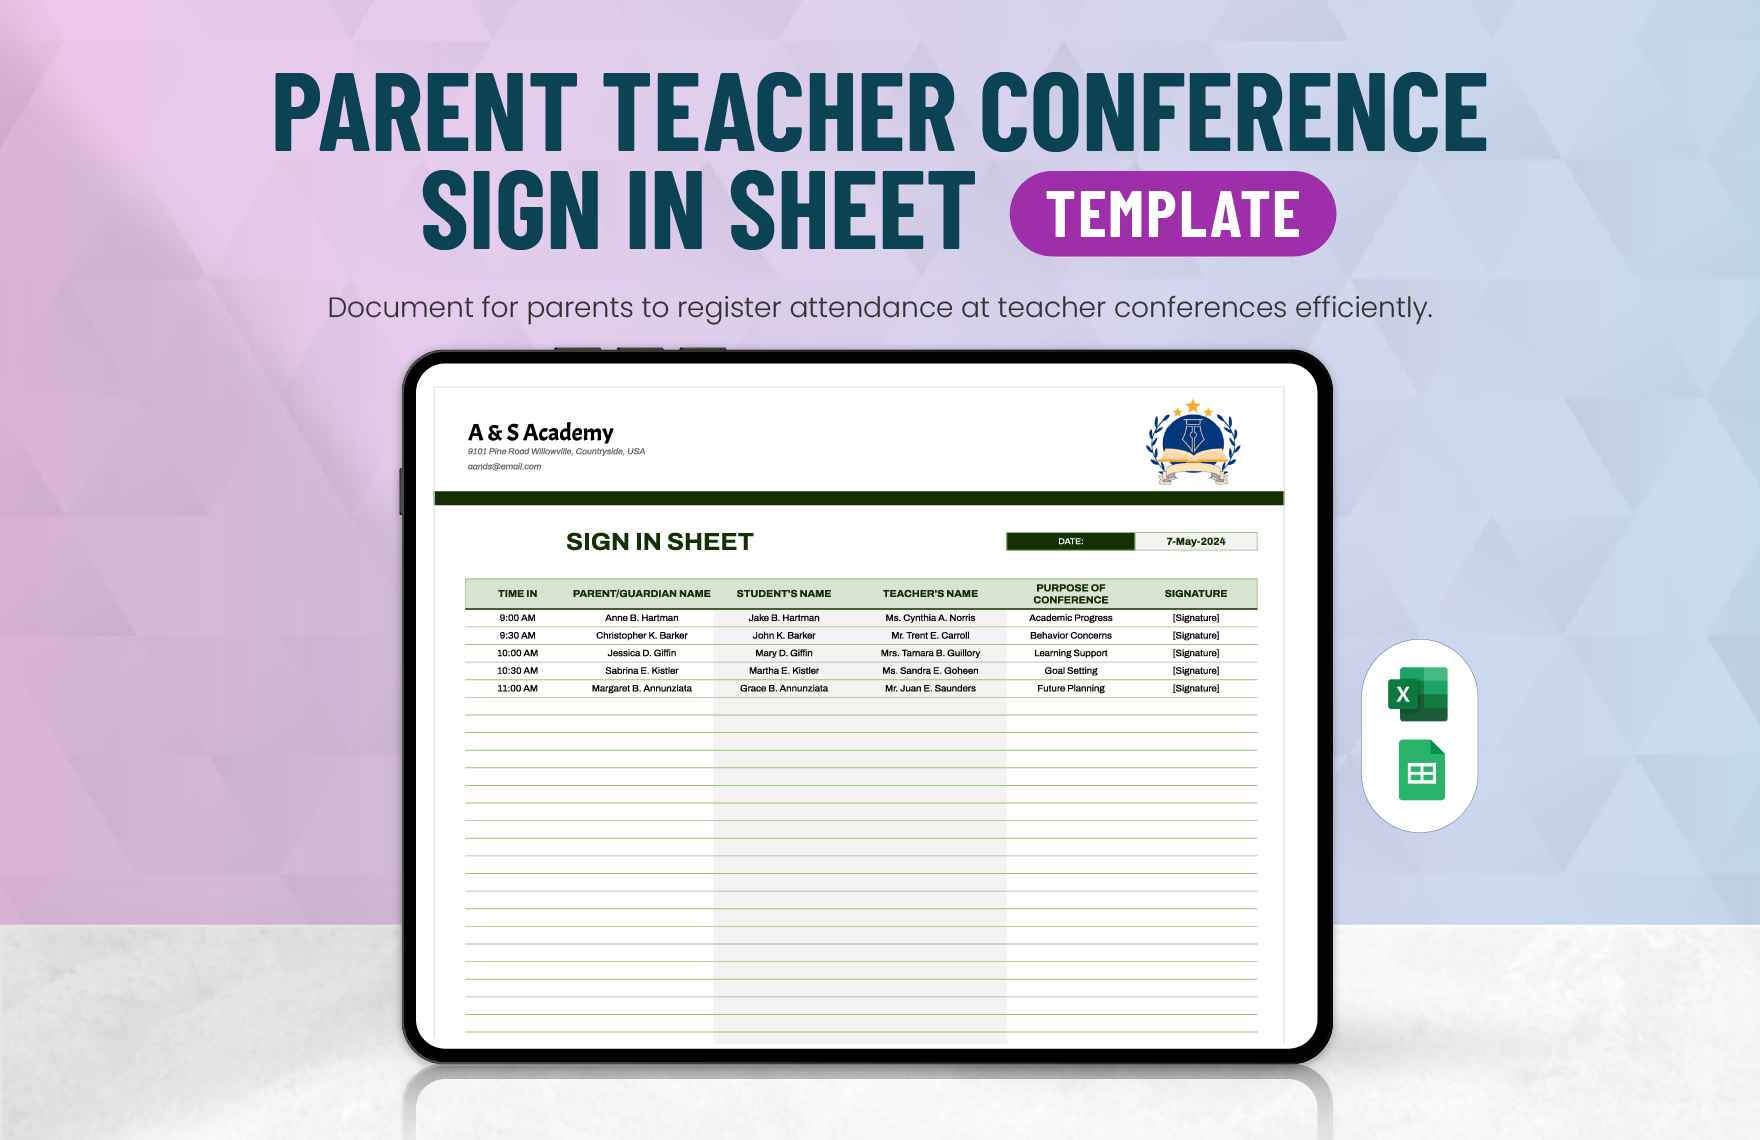 Parent Teacher Conference Sign in Sheet Template in Excel, Google Sheets